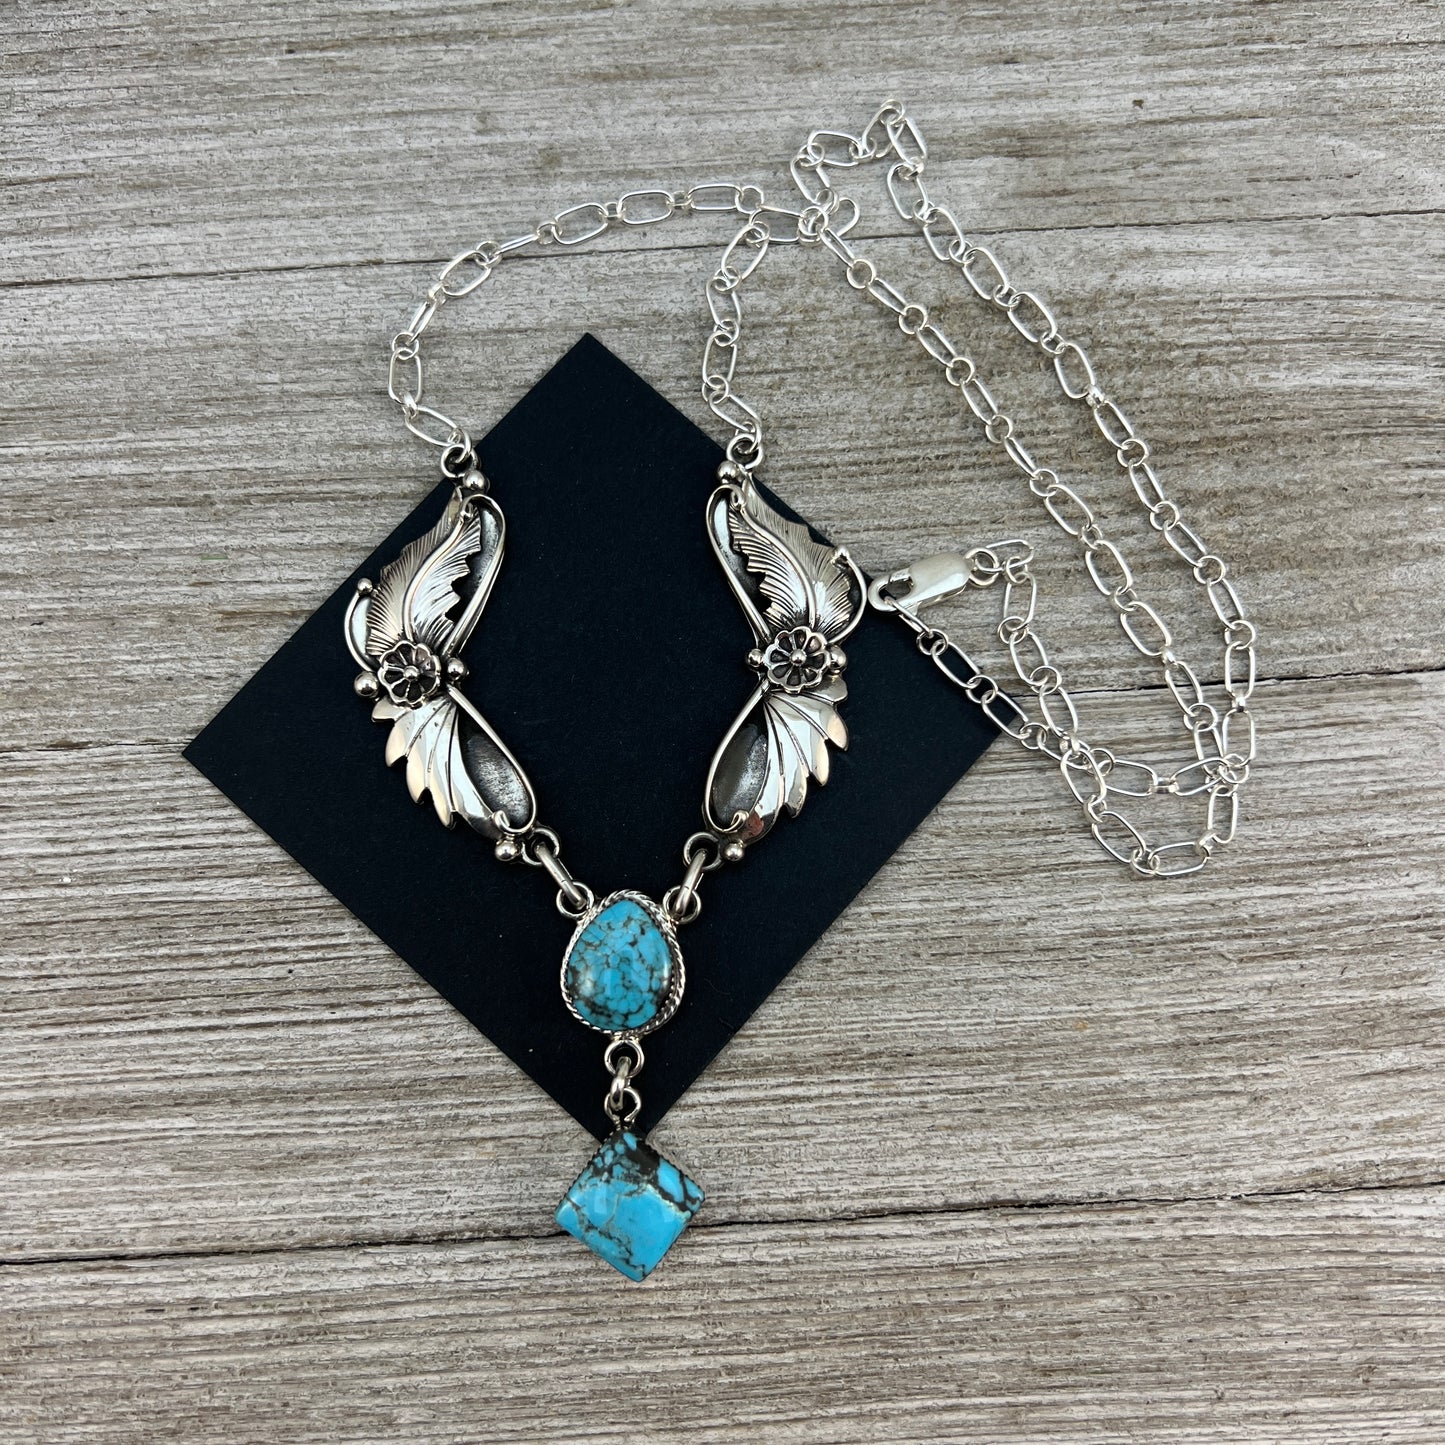 20" Floral leaf work necklace #3, Blue Kingman Turquoise, sterling silver, Navajo handmade by Sarah Yazzie